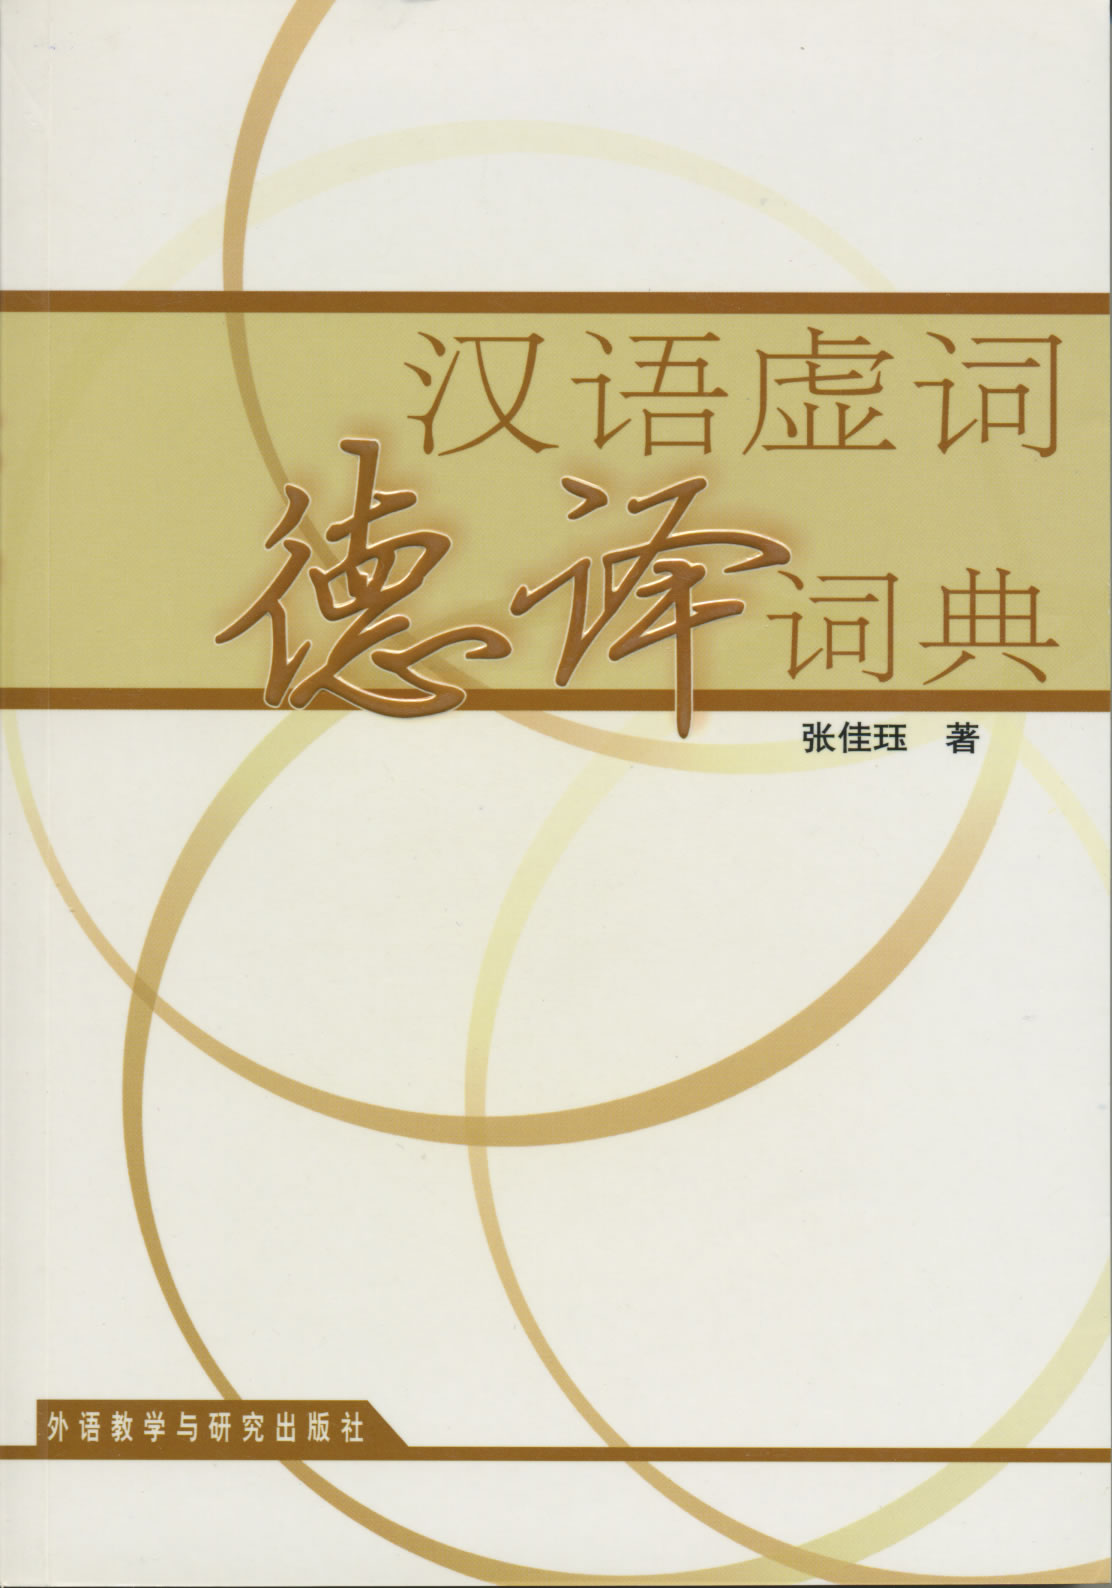 A Dictionary of Chinese Particles and their German translation<br>ISBN: 7-5600-3685-6, 7560036856, 9787560036854